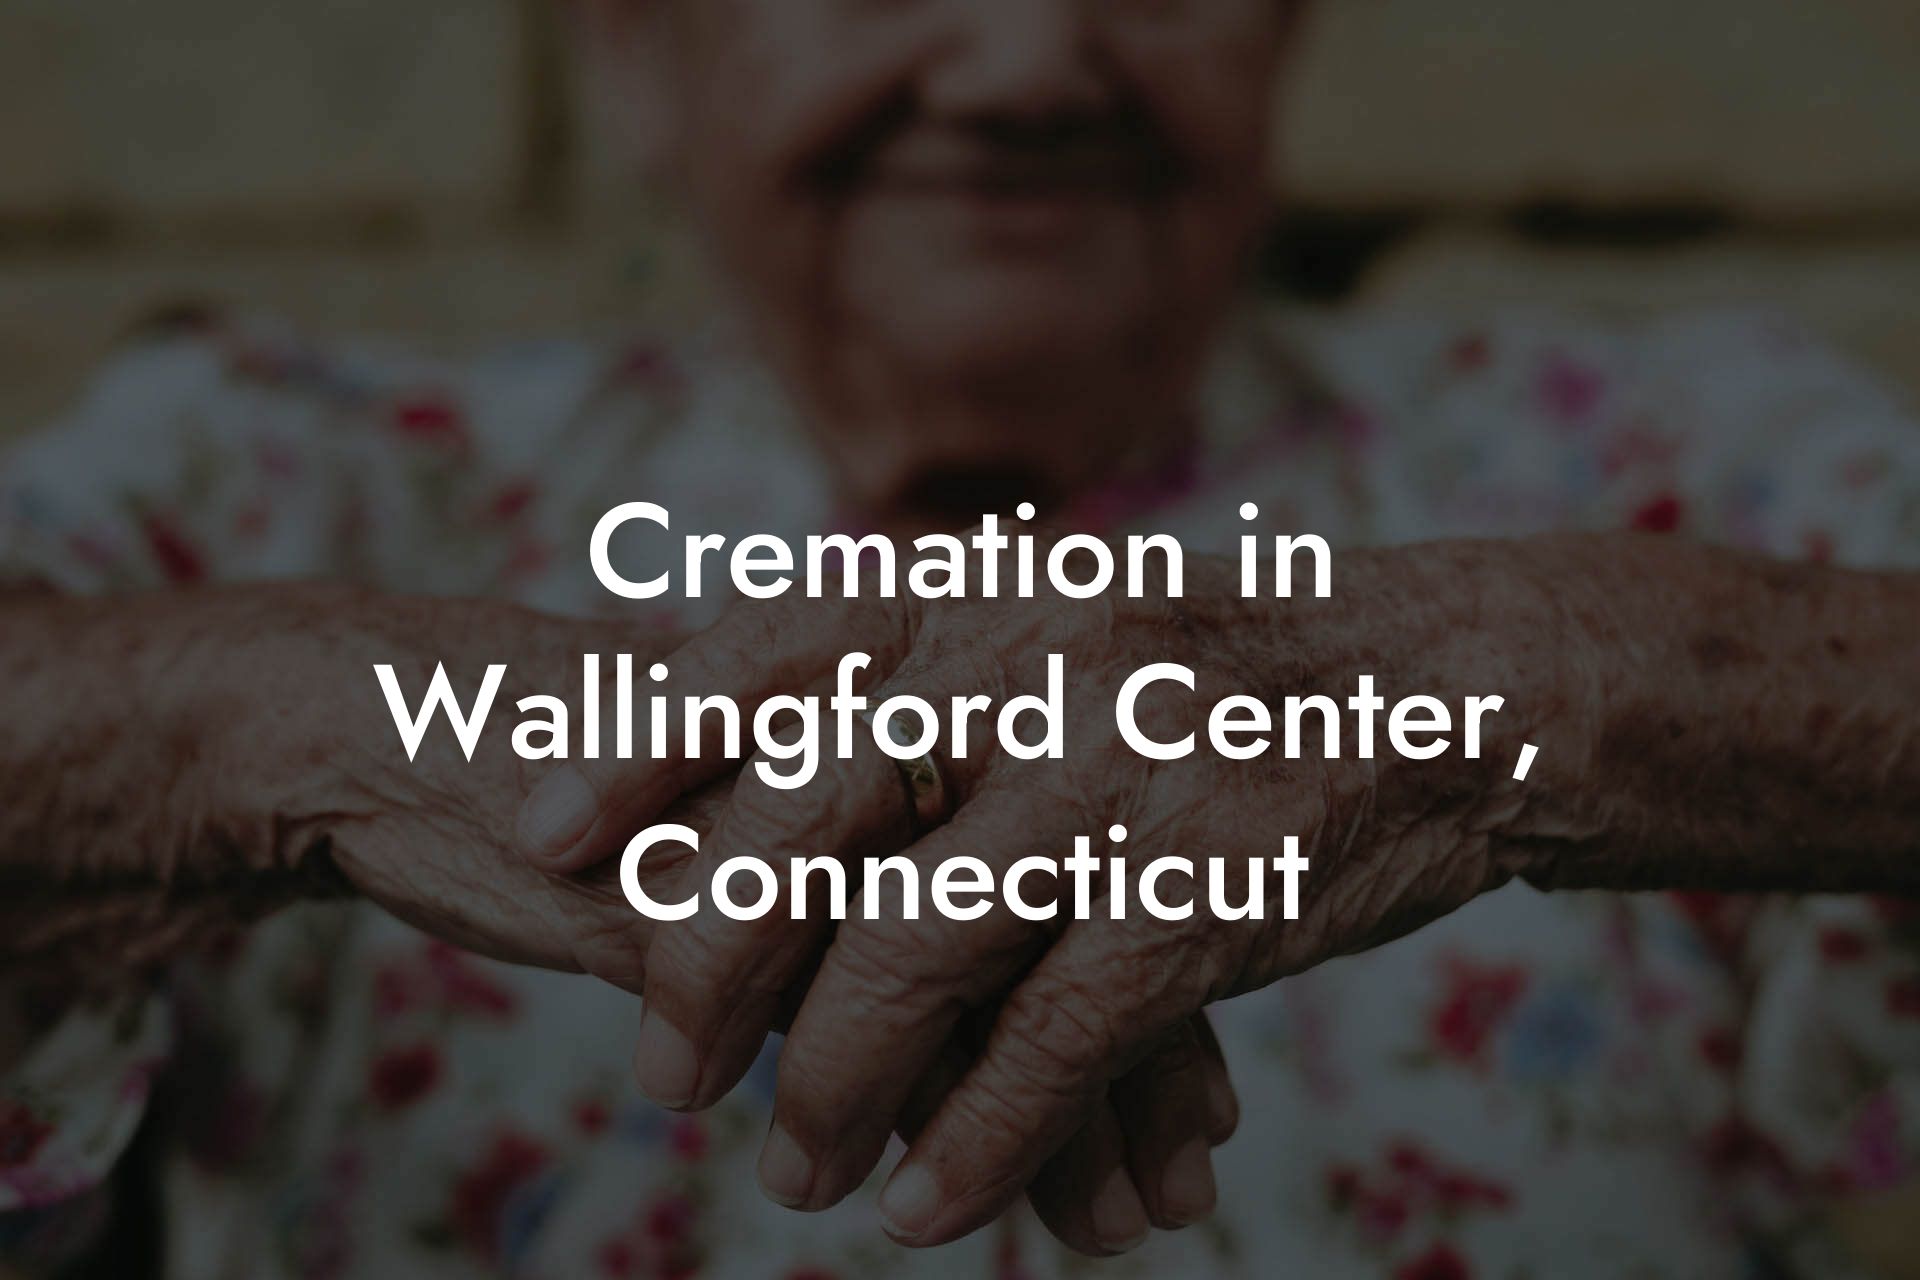 Cremation in Wallingford Center, Connecticut